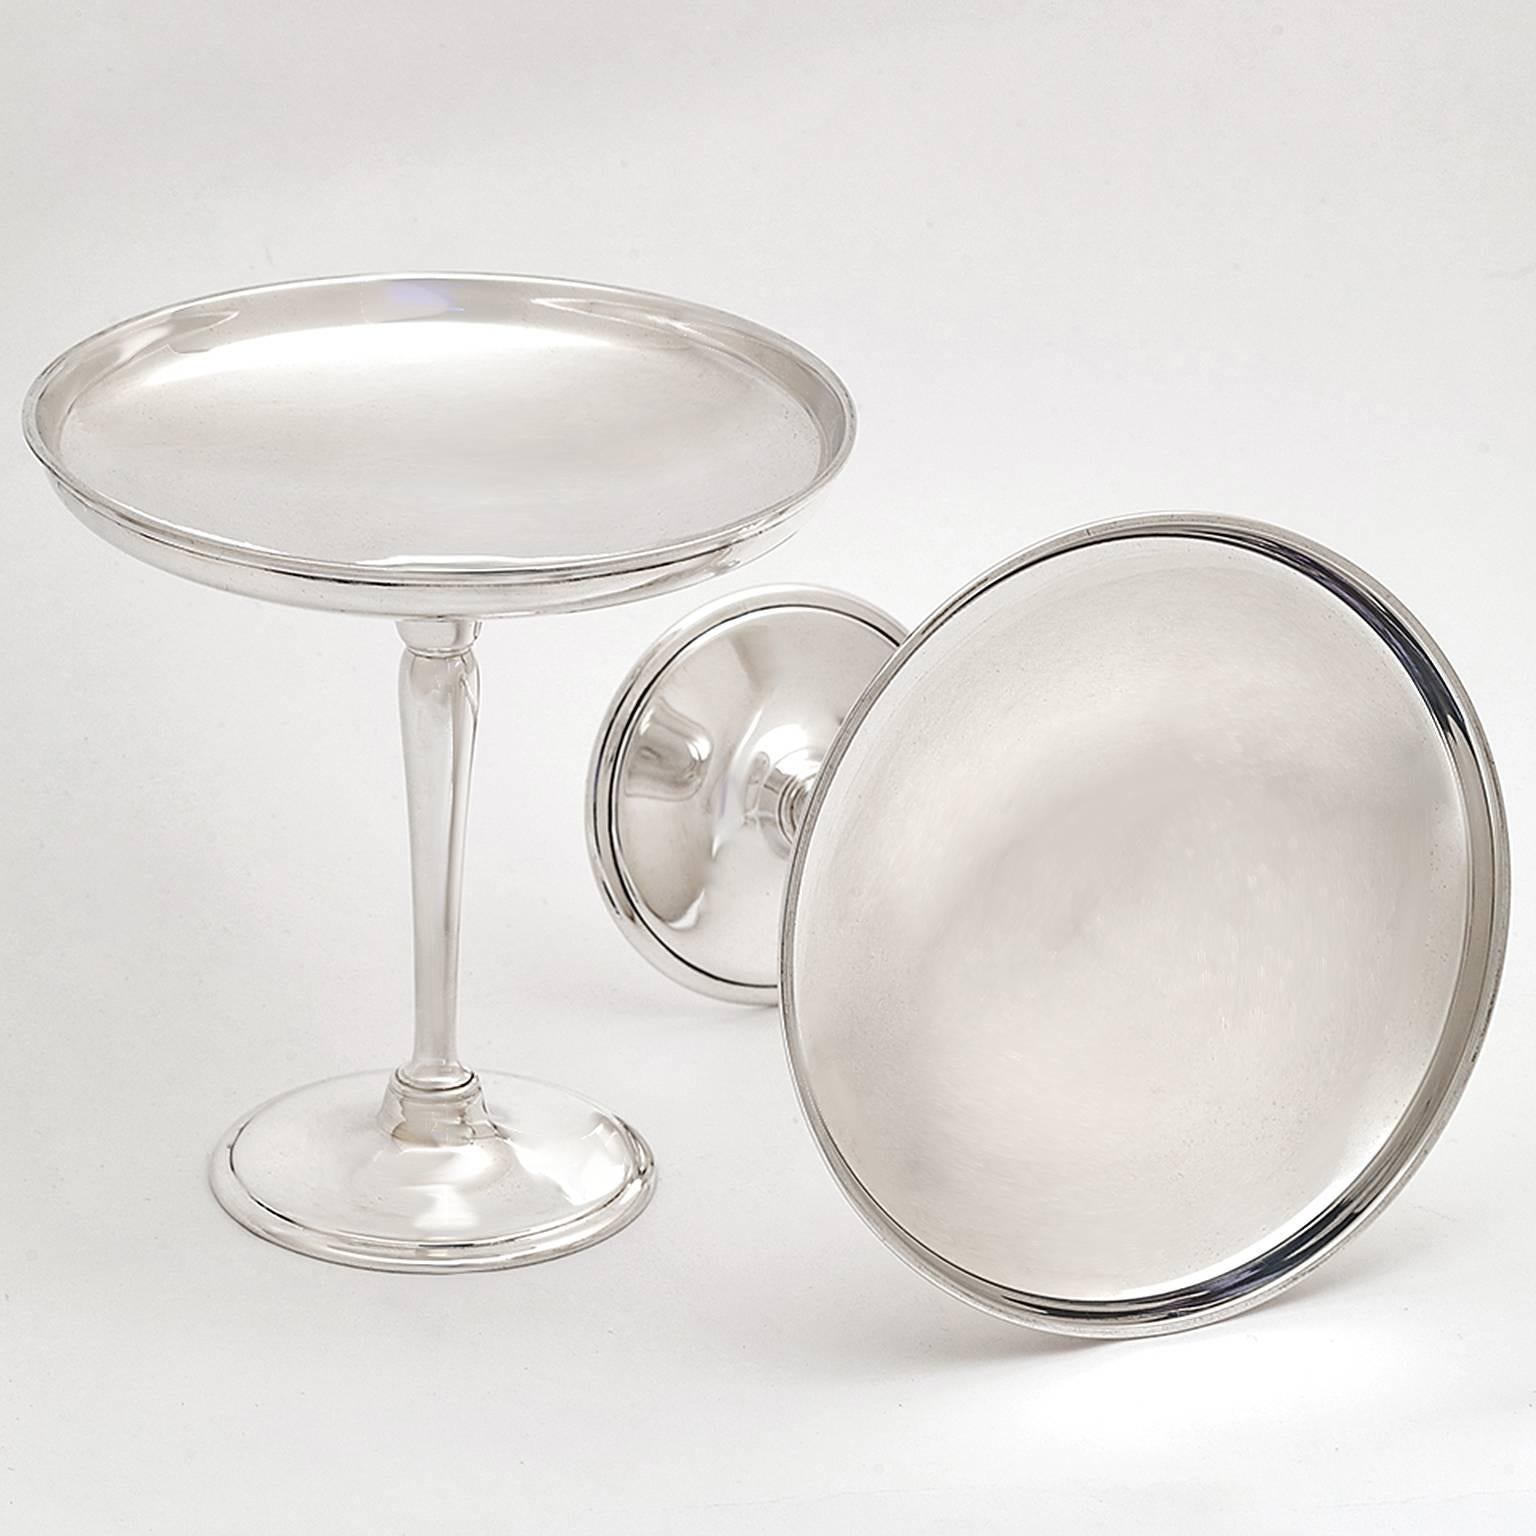 American Pair of Art Deco Tiffany & Co. Sterling Tazzas